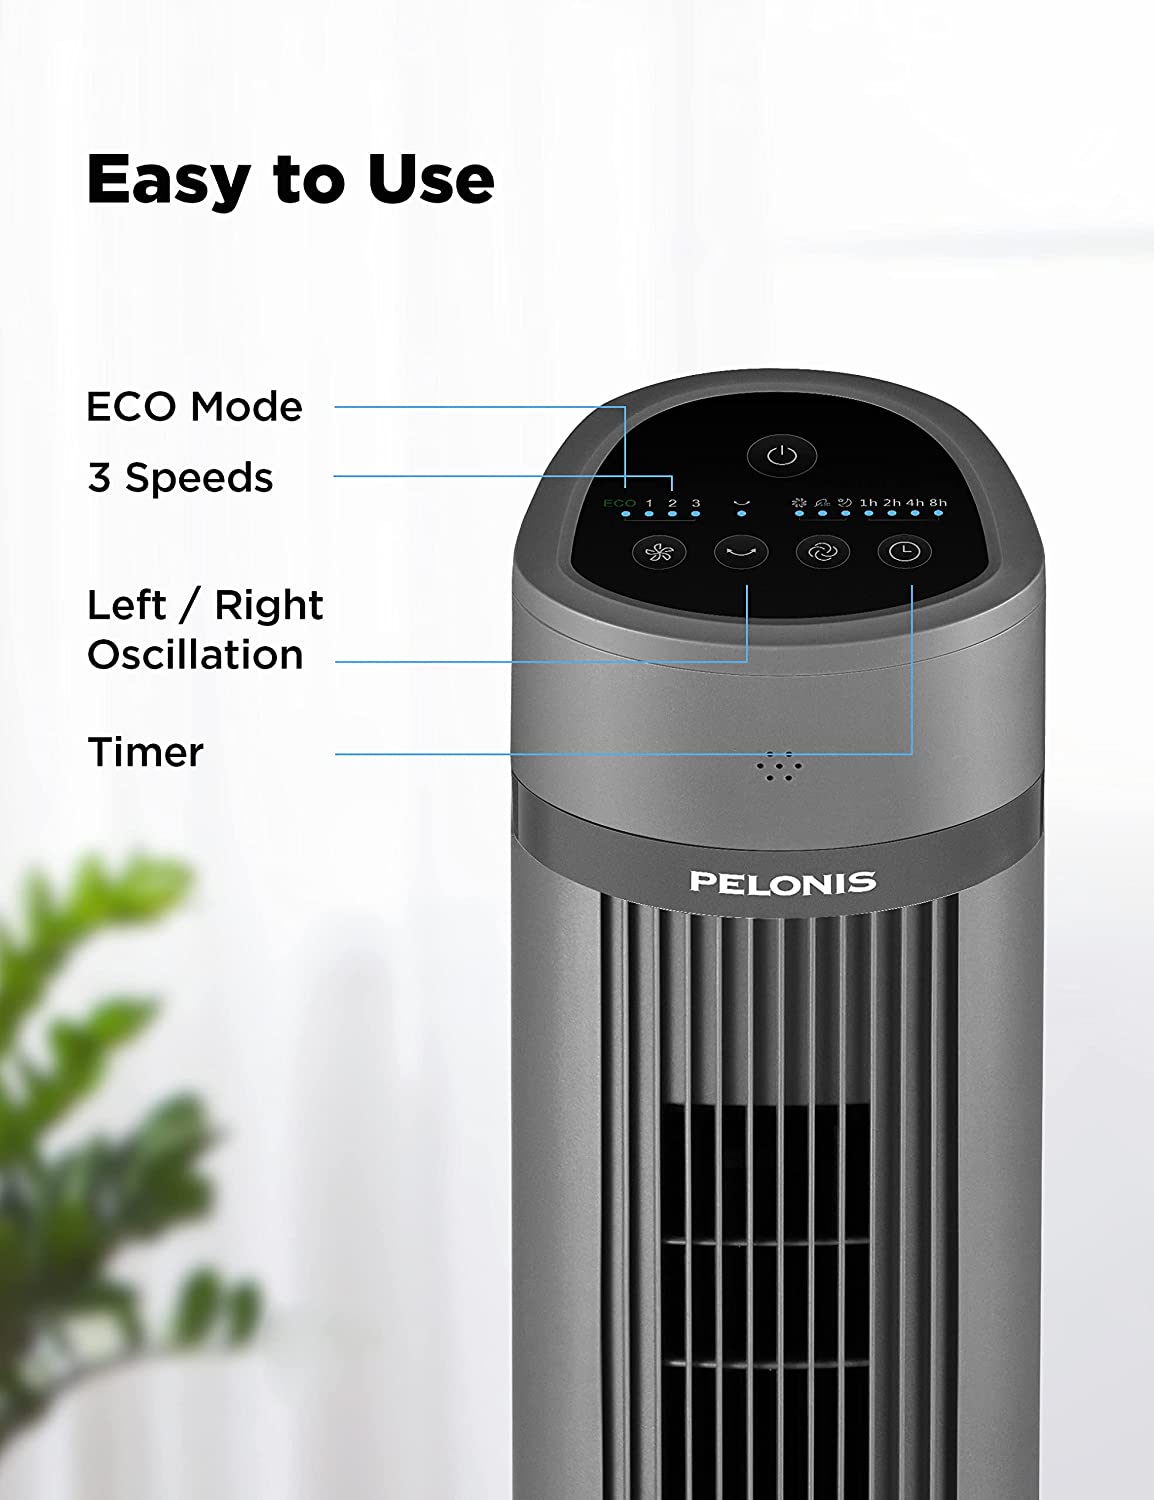 PELONIS 40 Oscillating Tower Fan | Remote Control | Quiet Stand Up | 3 Speed Settings | 3 Modes |15-Hour Timer | LED Display | for Bedroom Home Office Use| Black 40" Normal PELONIS 40-inch Tower Fans